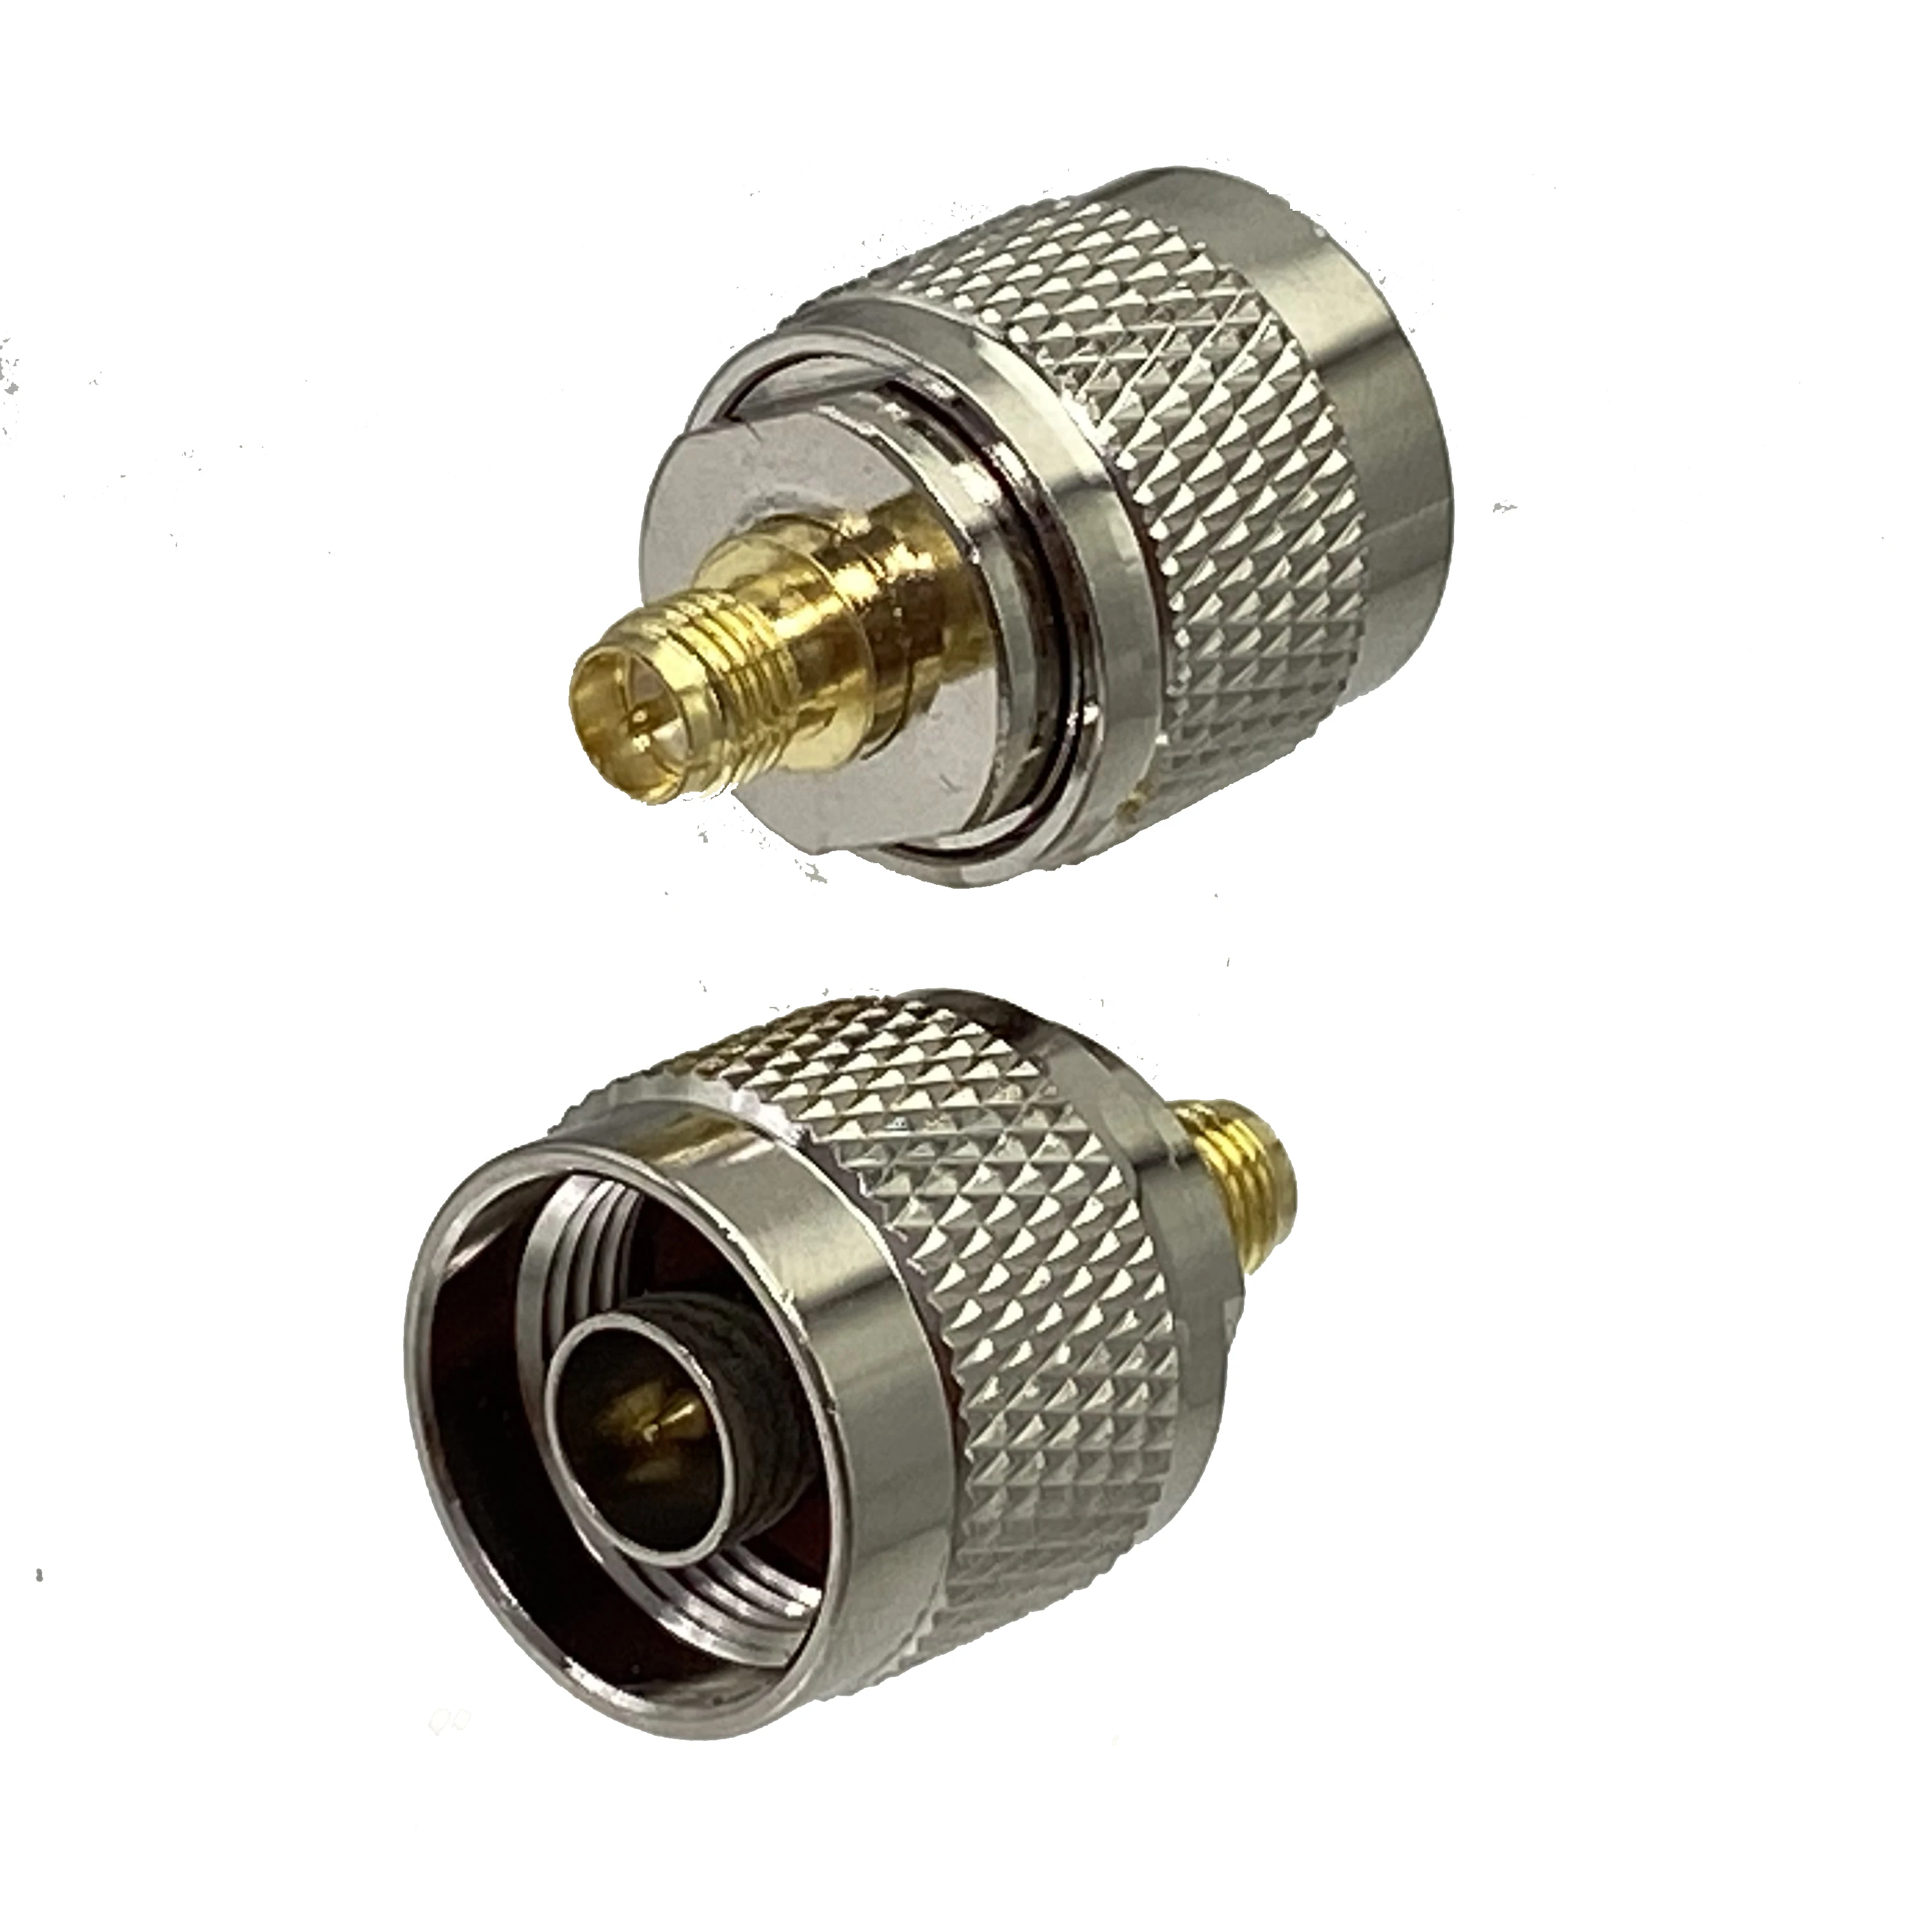 1pcs Connector Adapter N to SMA RP SMA Flange & Bulkhead Male Plug & Female Jack Wire Terminal RF Coaxial Converter New